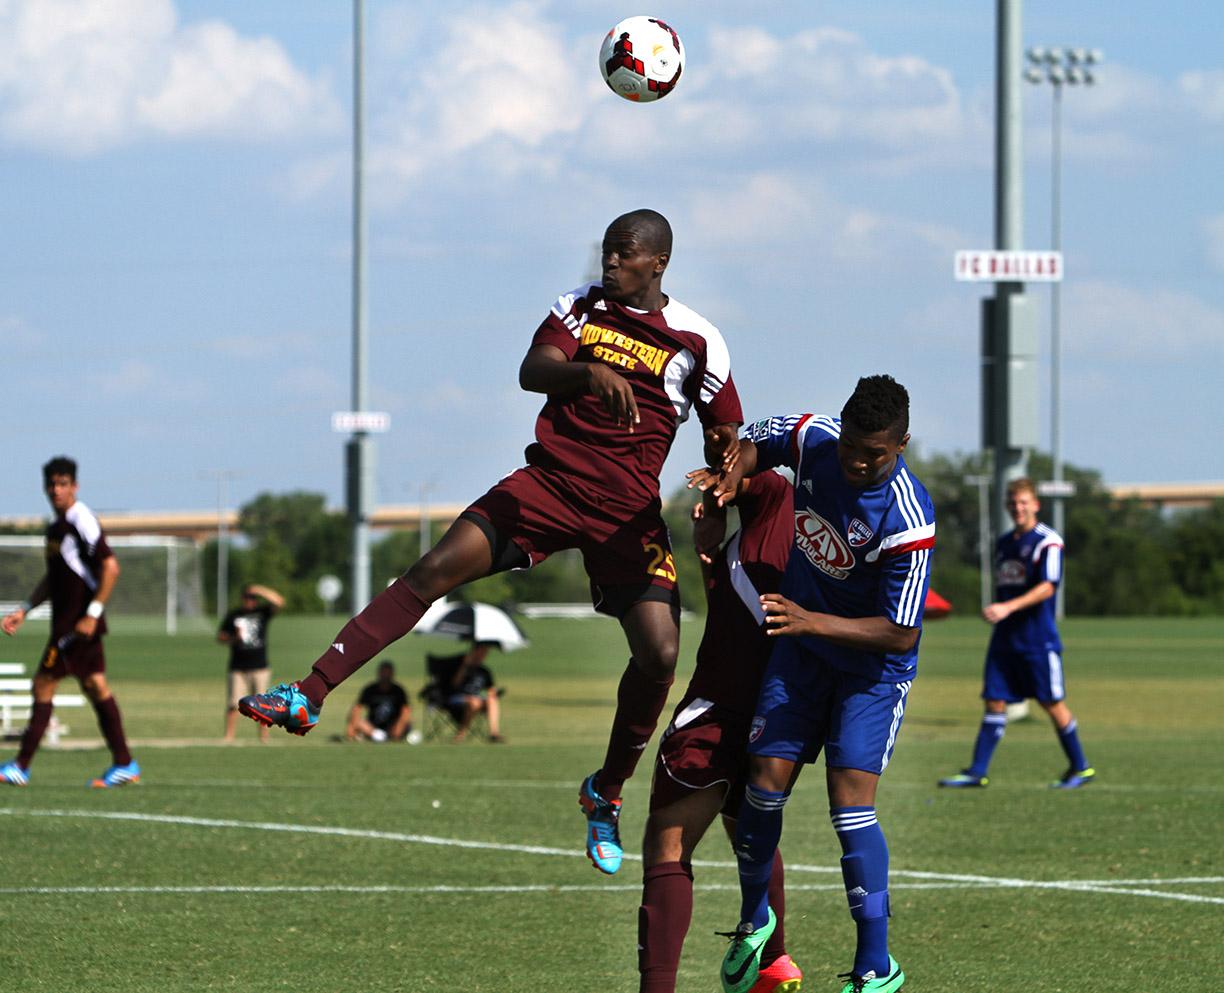 Hindowa Momoh, psychology freshman, heads the ball at Moneygram Soccer Park in Dallas Saturday afternoon. The game ended 2-0 against FC Dallas. Photo by Lauren Roberts